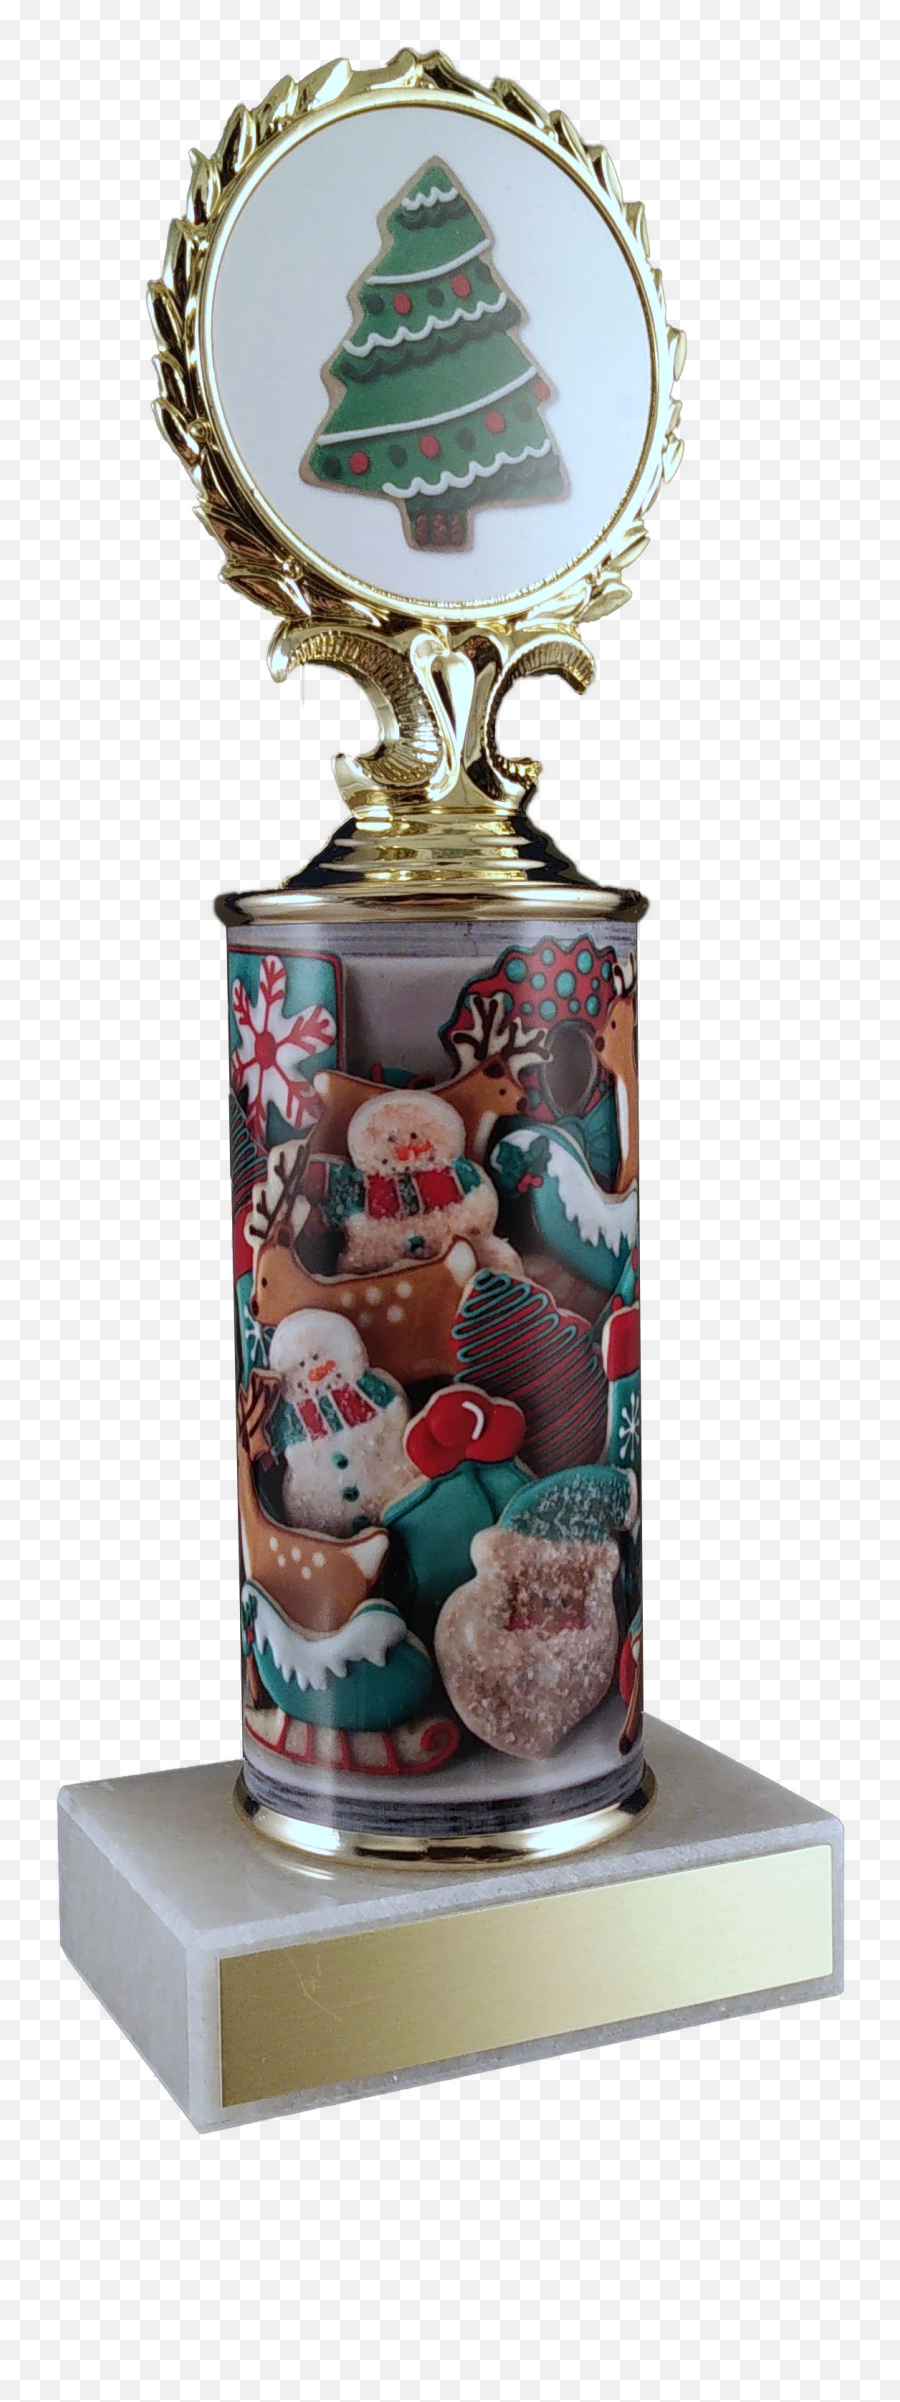 Christmas Cookie Column Trophy On Marble - Christmas Trophy Emoji,Trophy Emoji Transparent